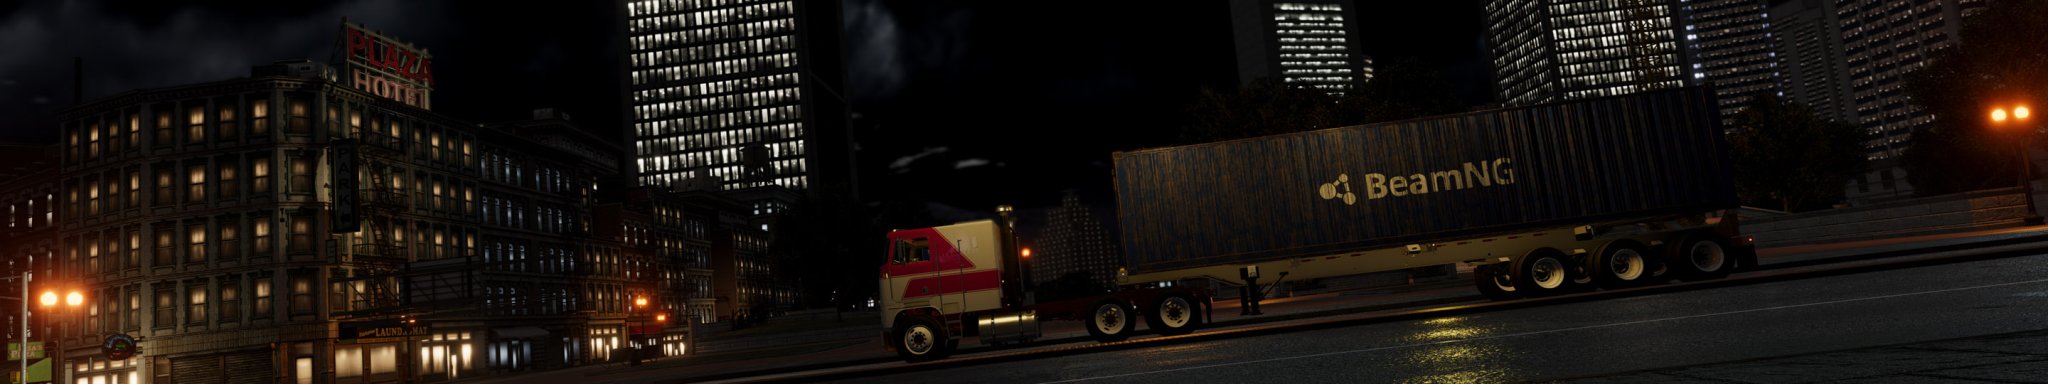 3 BeamNG FAIRHAVEN Gavril T SERIES delivery to PLAZA HOTEL copy.jpg